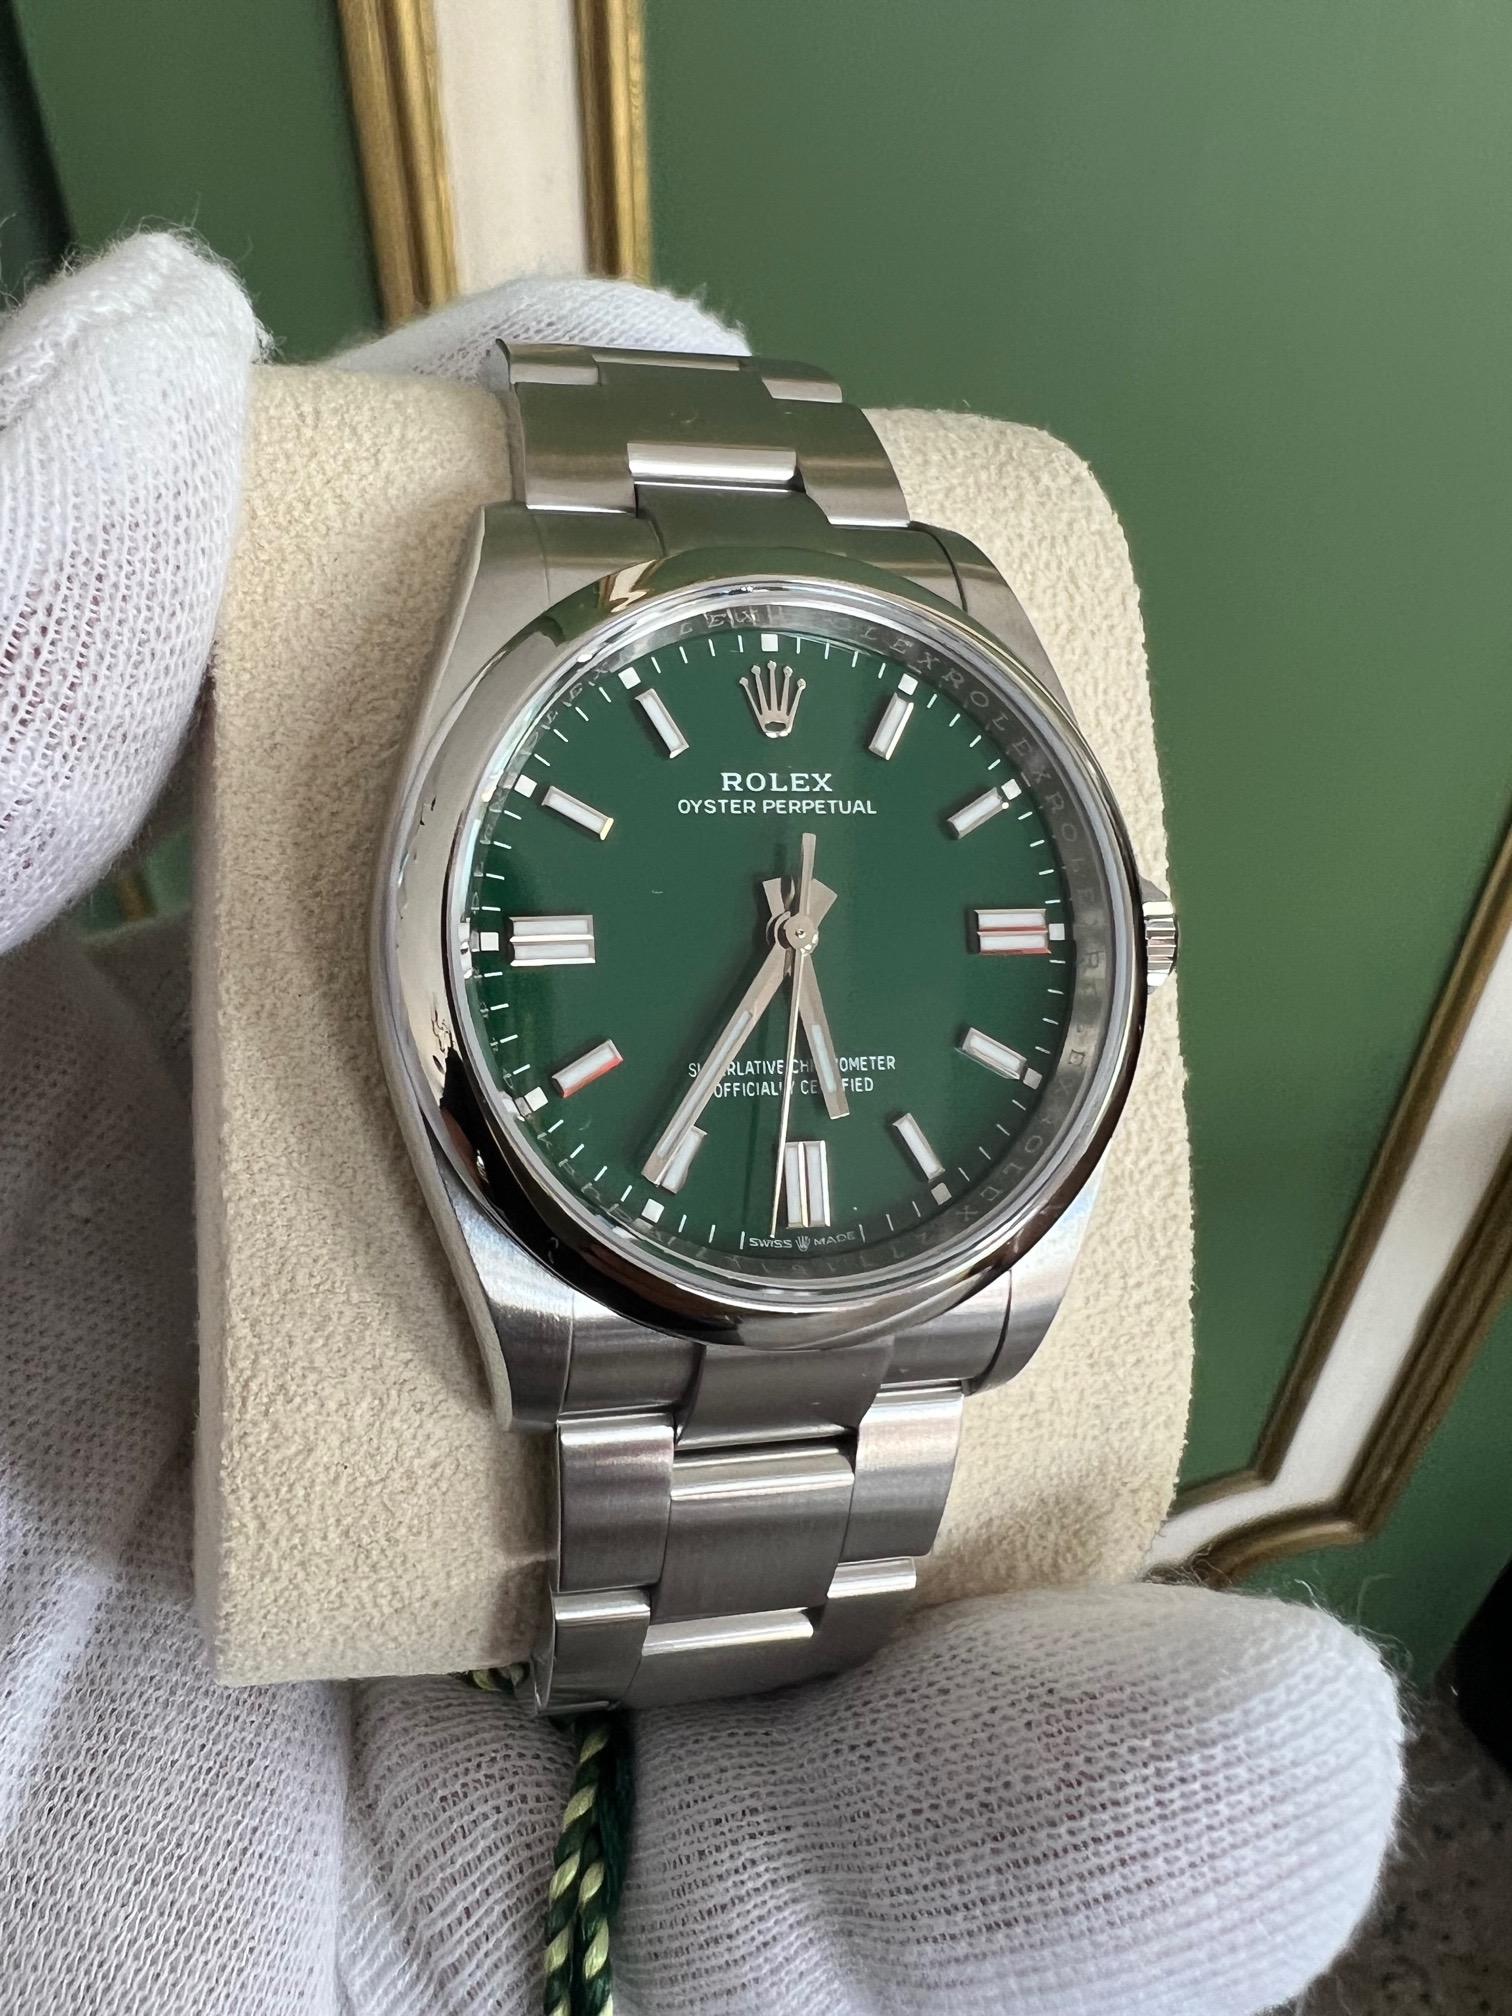 A beautiful, unworn, Rolex Oyster green dial, mens watch. Reference 126000 36mm, full set even includes the boutique green Rolex bag. Purchased February 6, 2023. Dial looks dark green or brighter green depending on lighting. We have been a 1stdibs